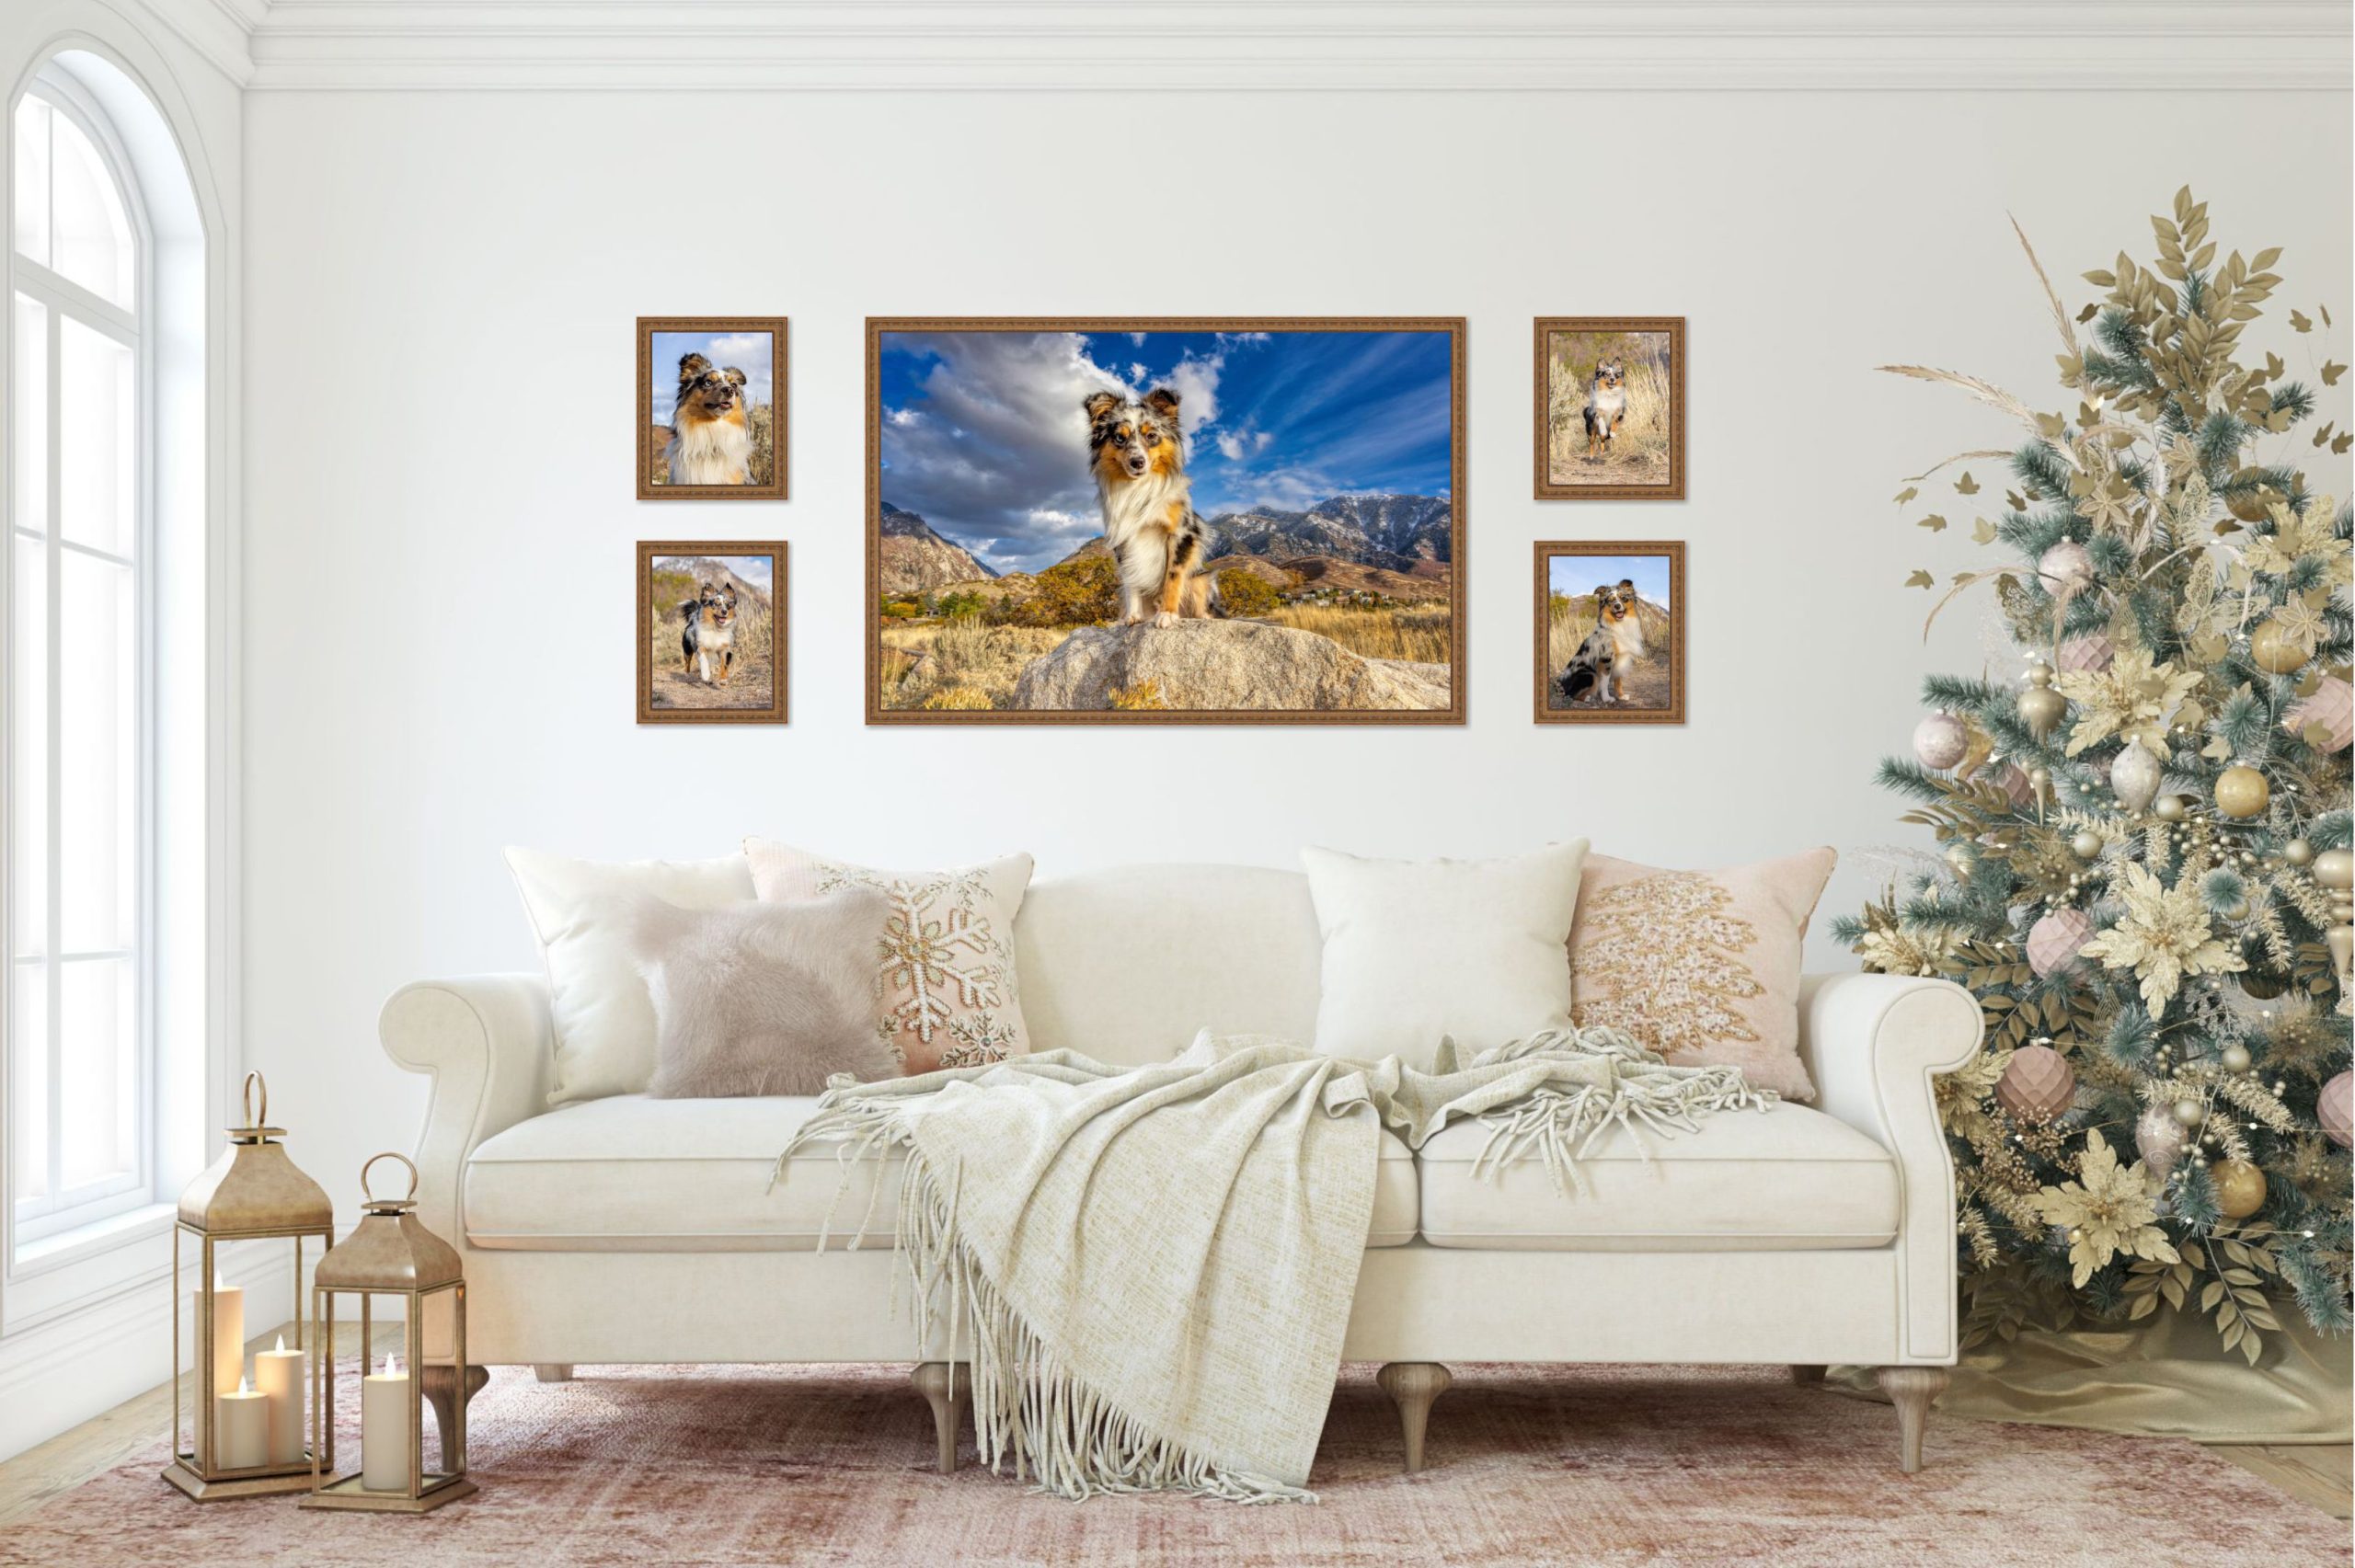 Large portrait and four smaller portraits of Micro Australian Shepherd, Fernando, in ornate gold frames over a white sofa next to a Christmas Tree.